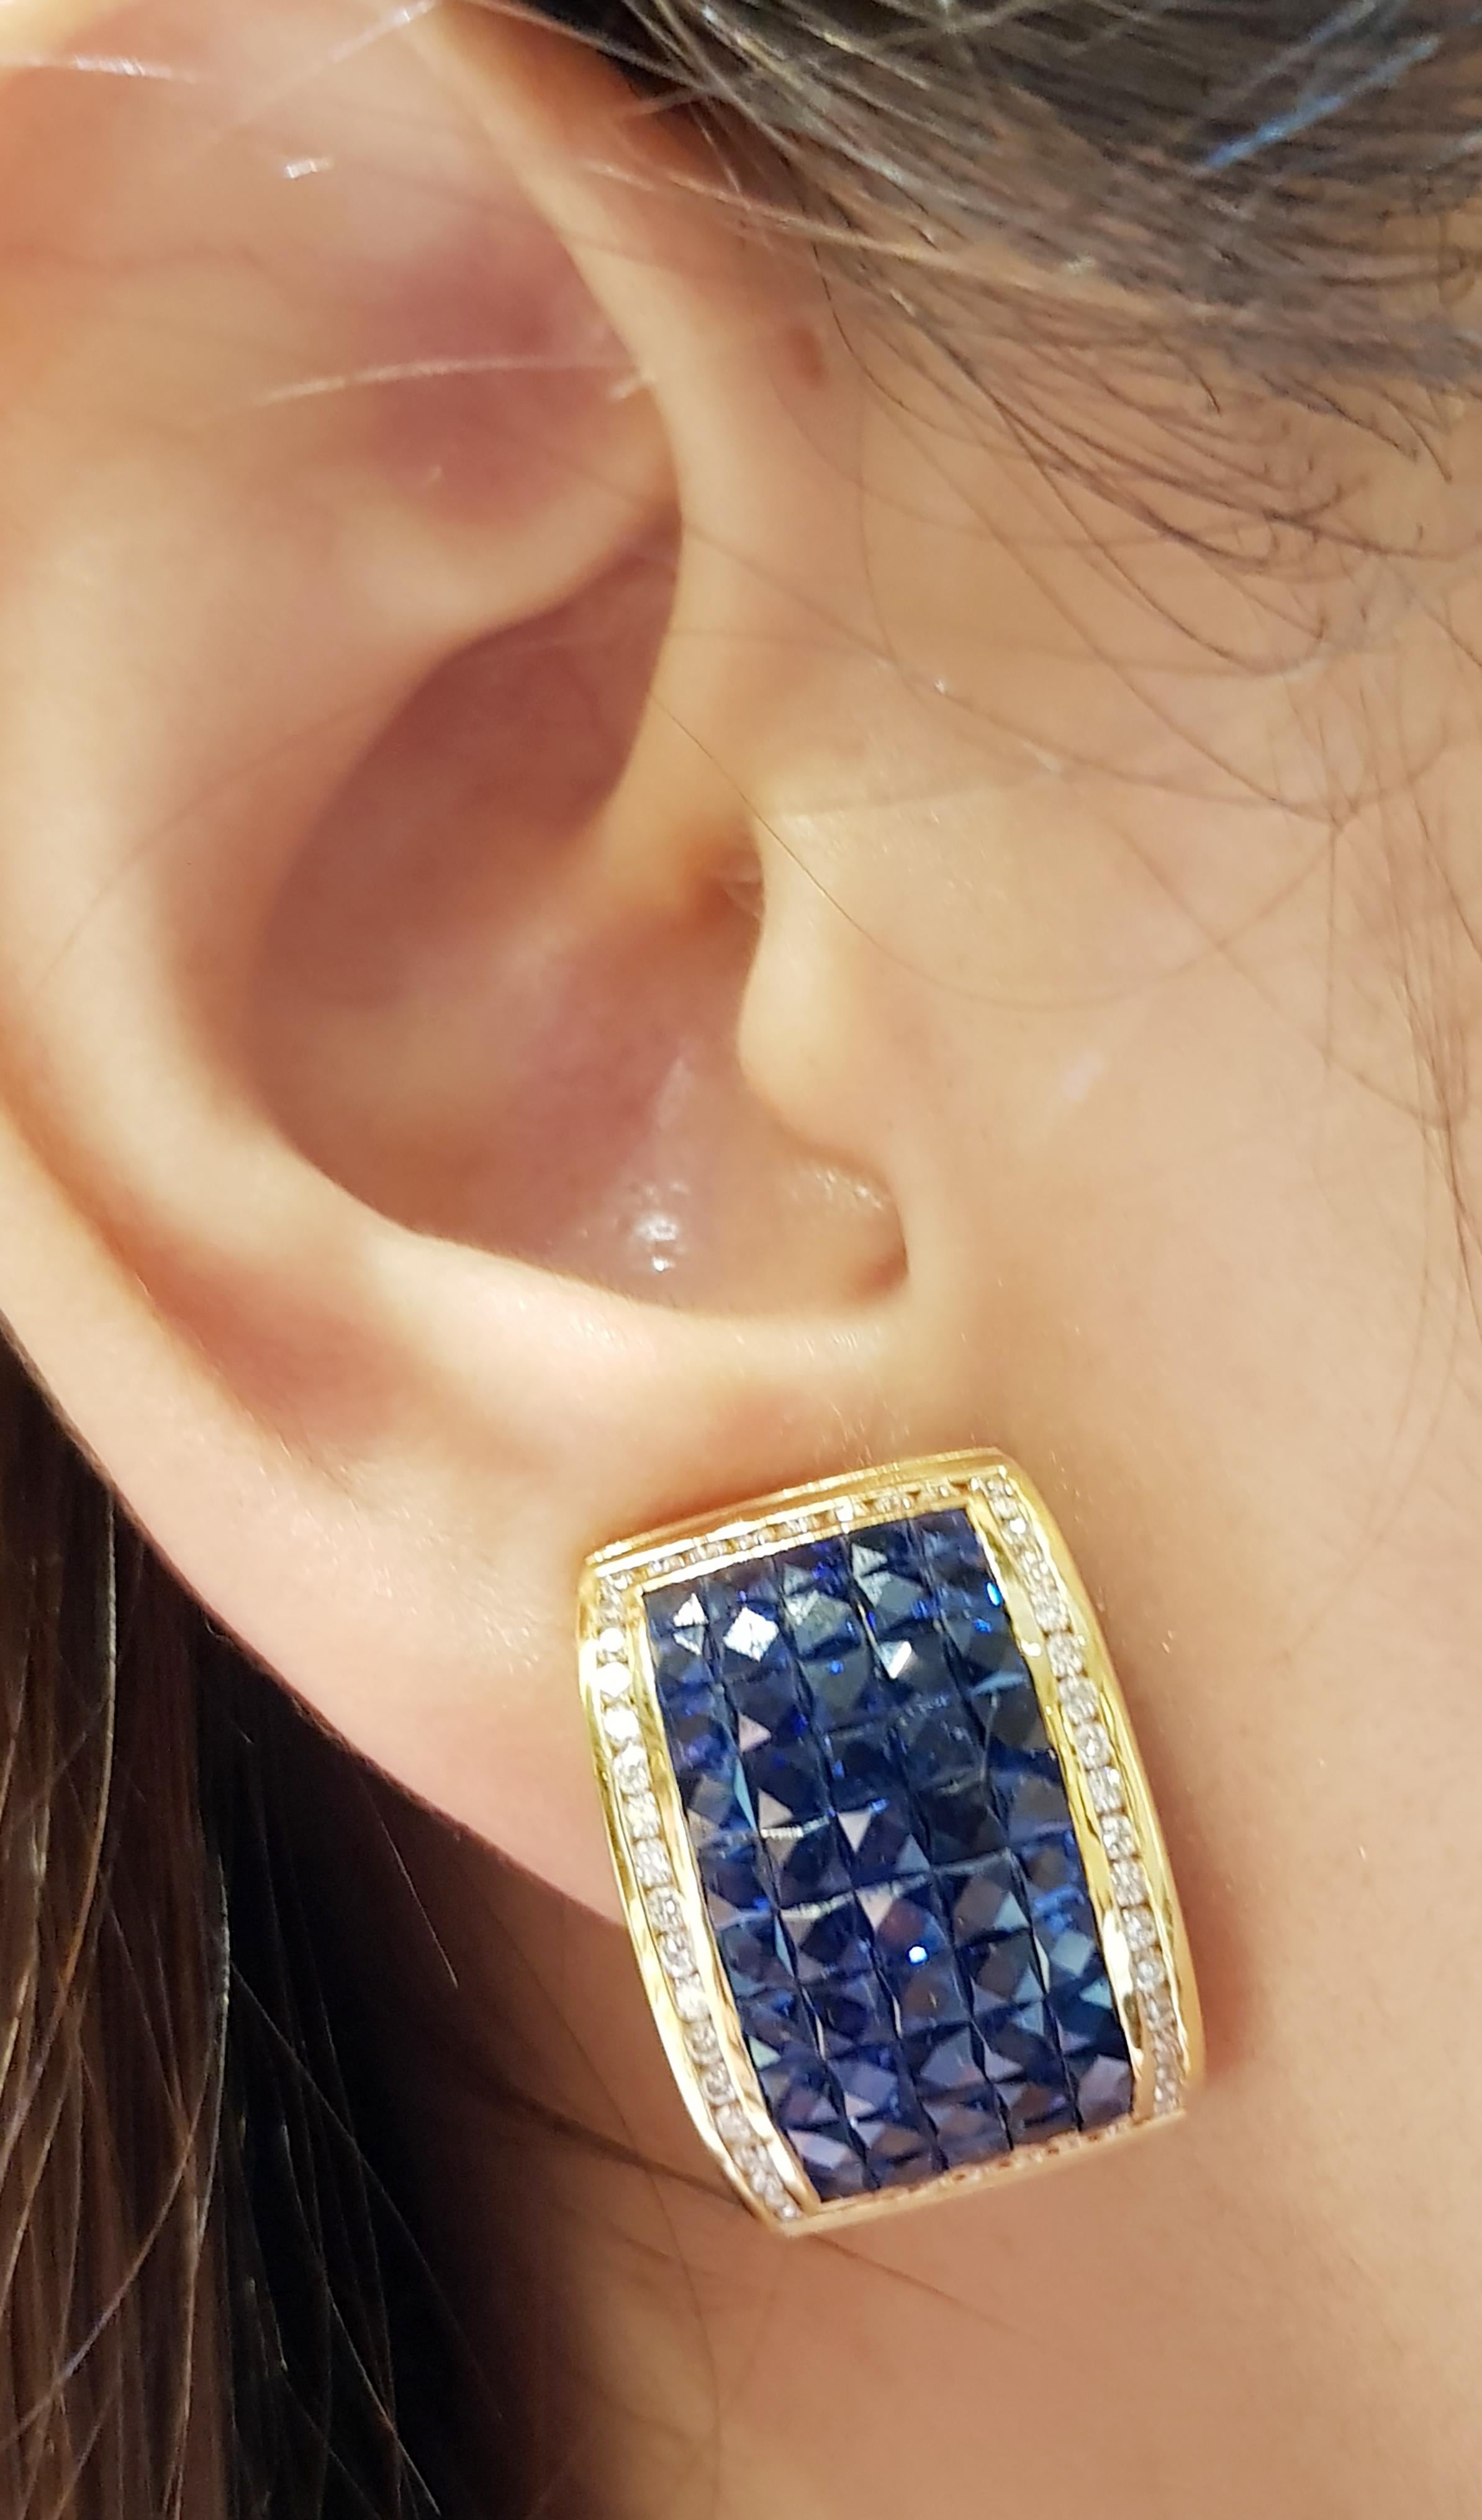 Blue Sapphire 8.64 carats with Diamond 0.78 carat Earrings set in 18 Karat Gold Settings

Width:  1.3 cm 
Length: 2.1 cm
Total Weight: 16.36 grams

